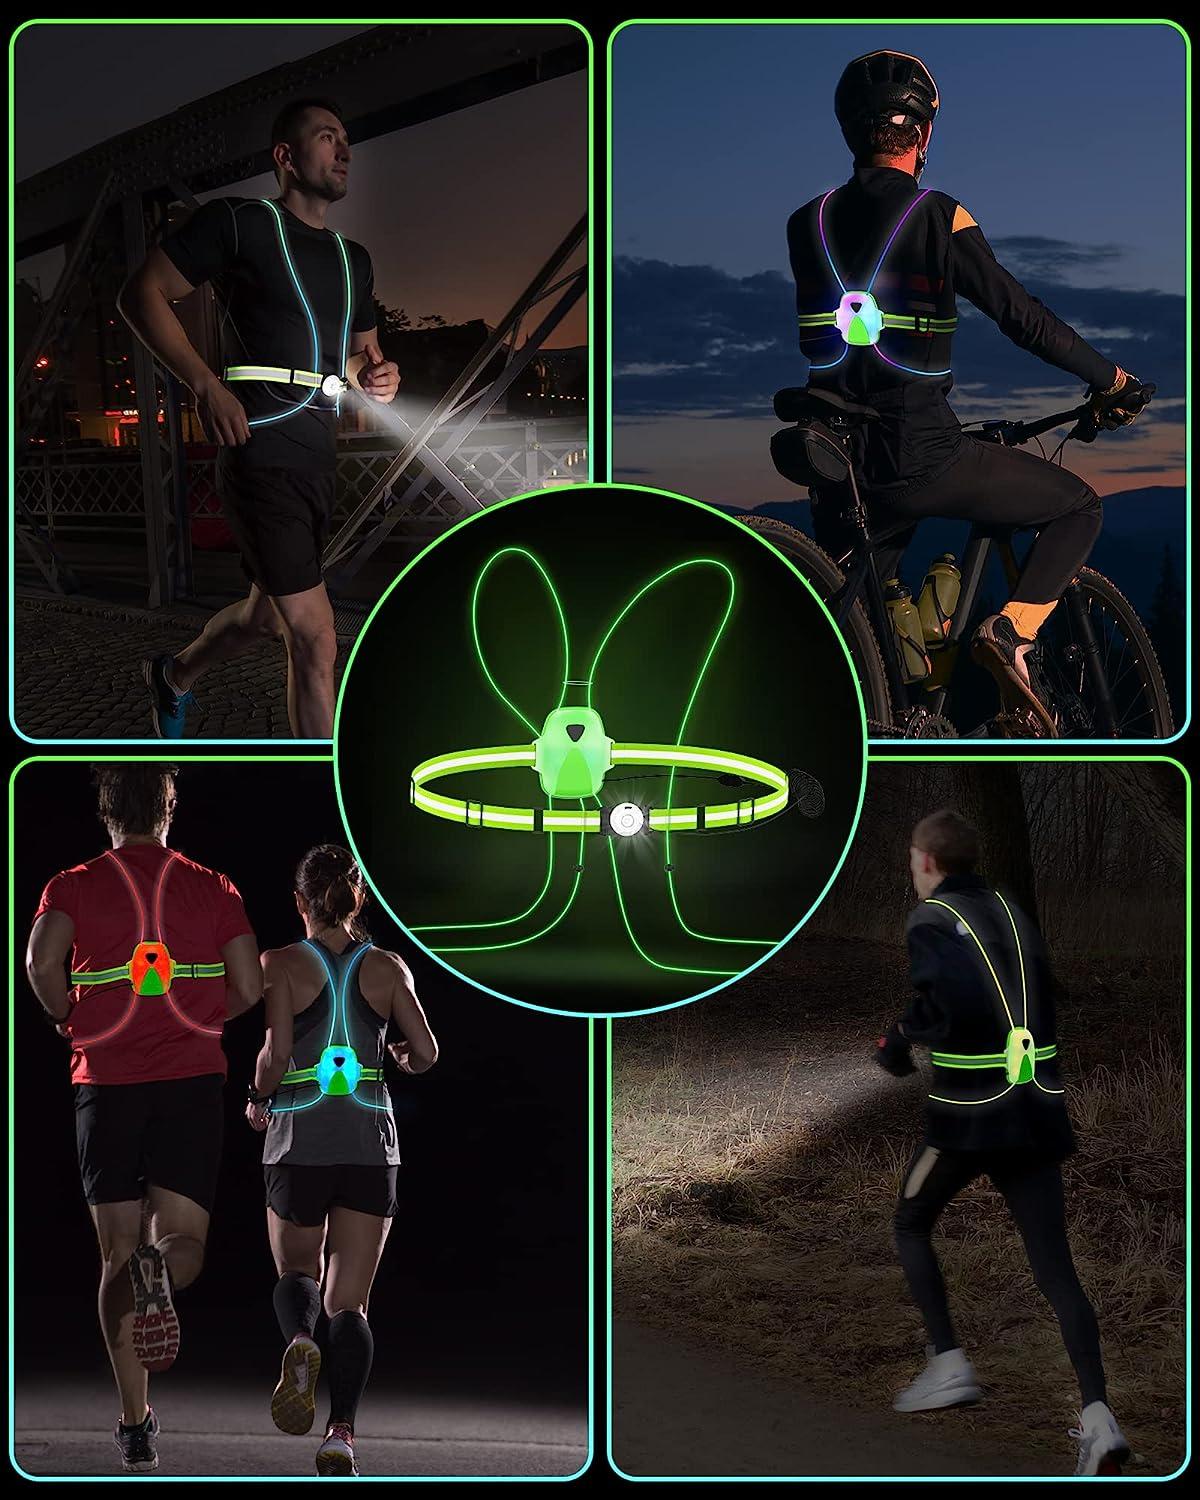  LED Reflective Running Vest, High Visibility Warning Lights  for Runners, Adjustable Elastic Safety Gear Accessories for Men/Women Night  Running, Walking, Cycling/Biking : Sports & Outdoors